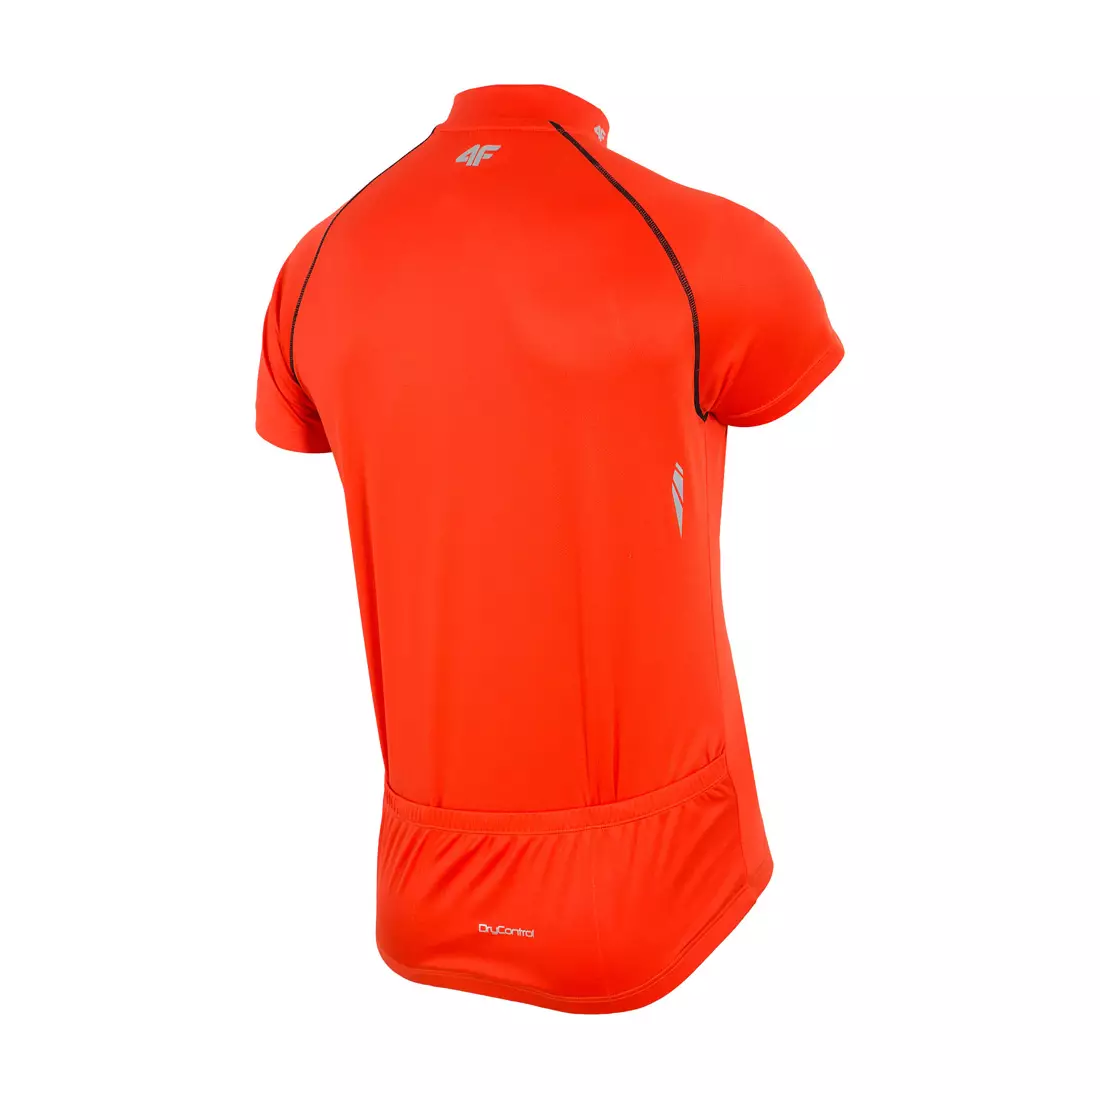 4F men's cycling jersey RKM003 red